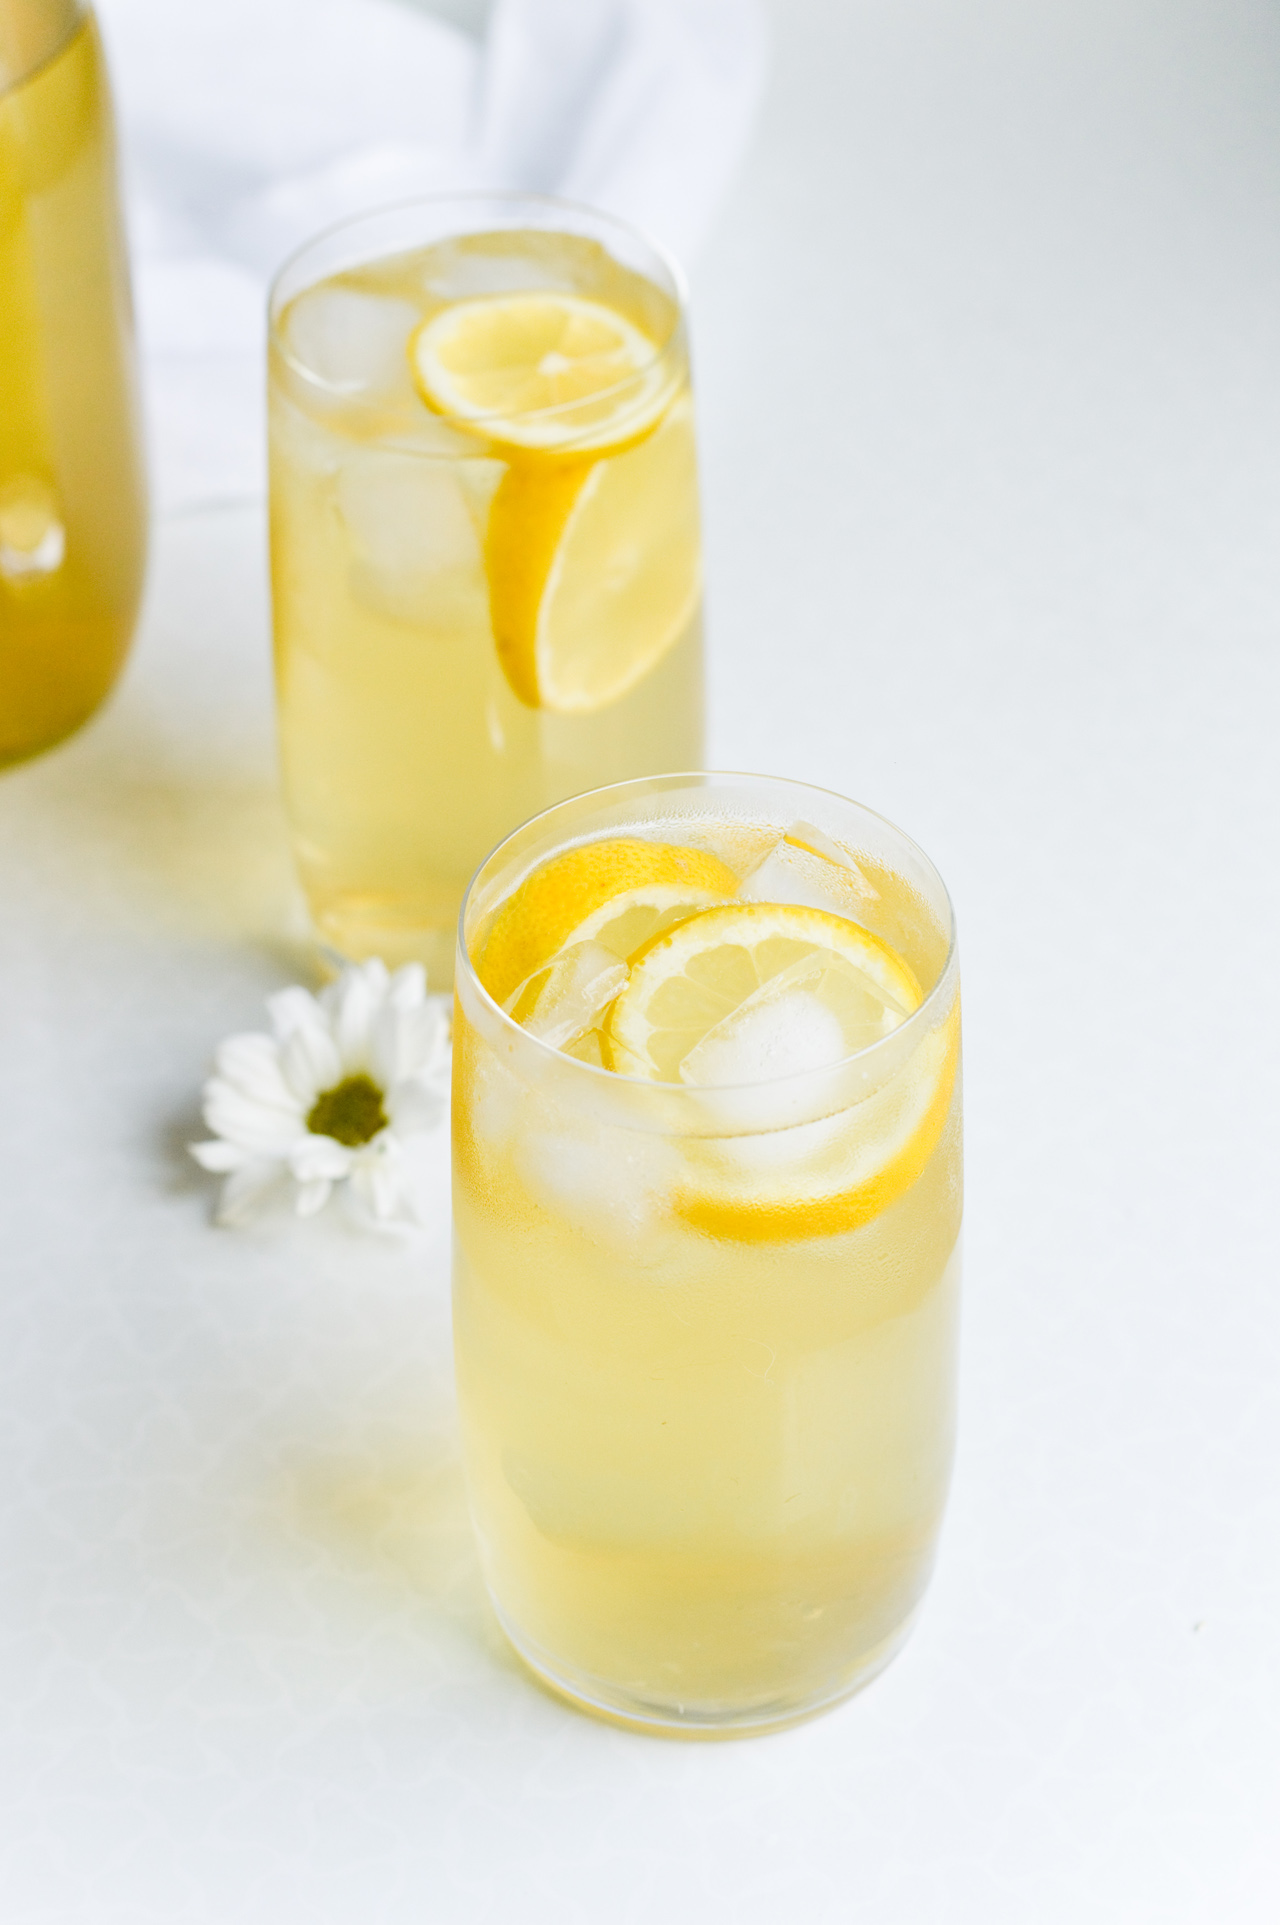 Forget the store-bought stuff! Make this Honey apricot chamomile iced tea that's light, sweet, fruity and so refreshing.